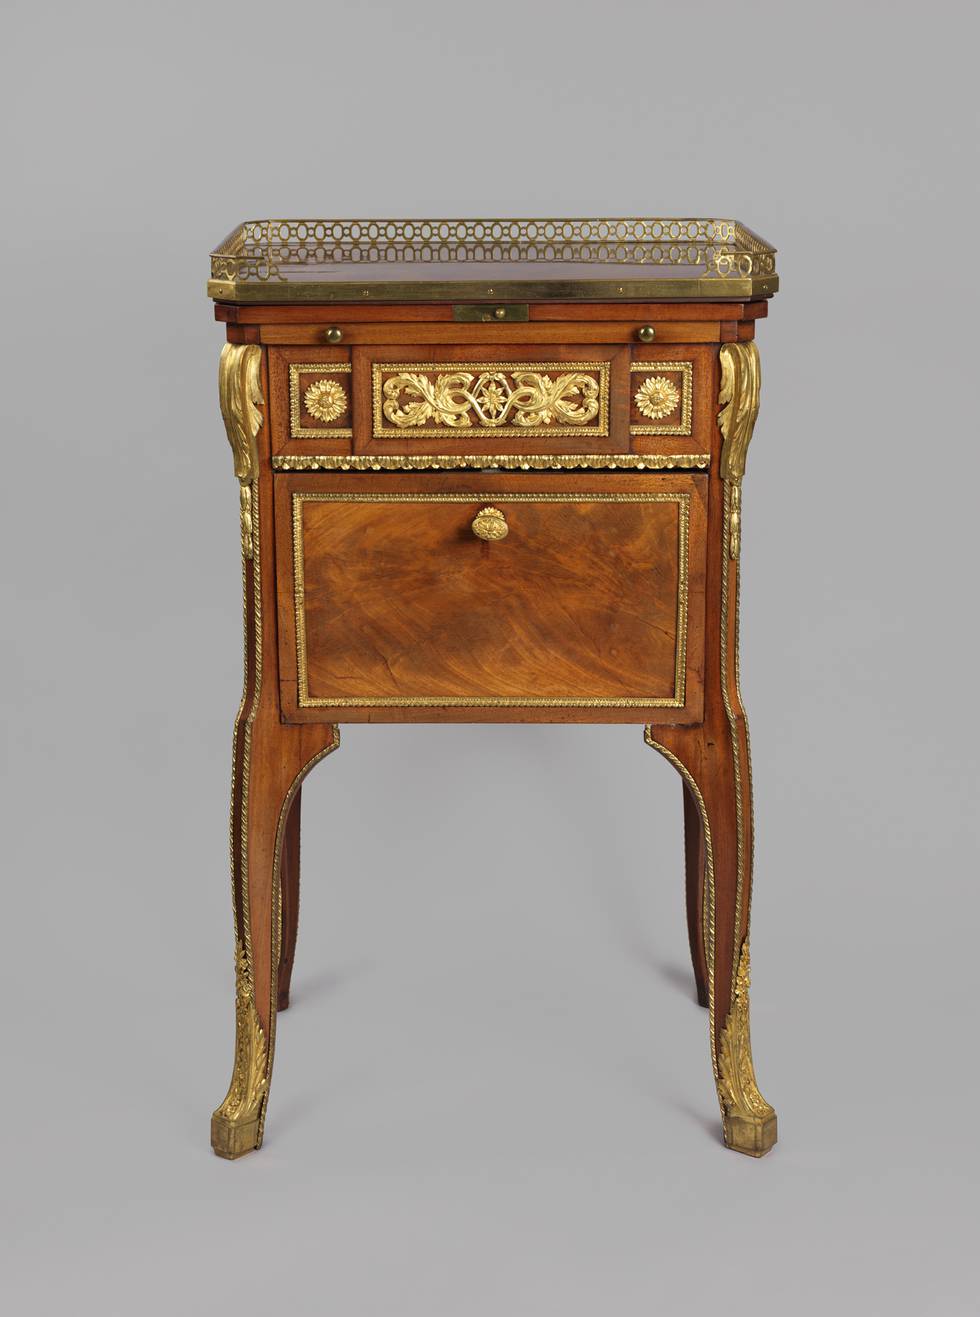 Photograph of the front of an eighteenth-century toilet and writing-table